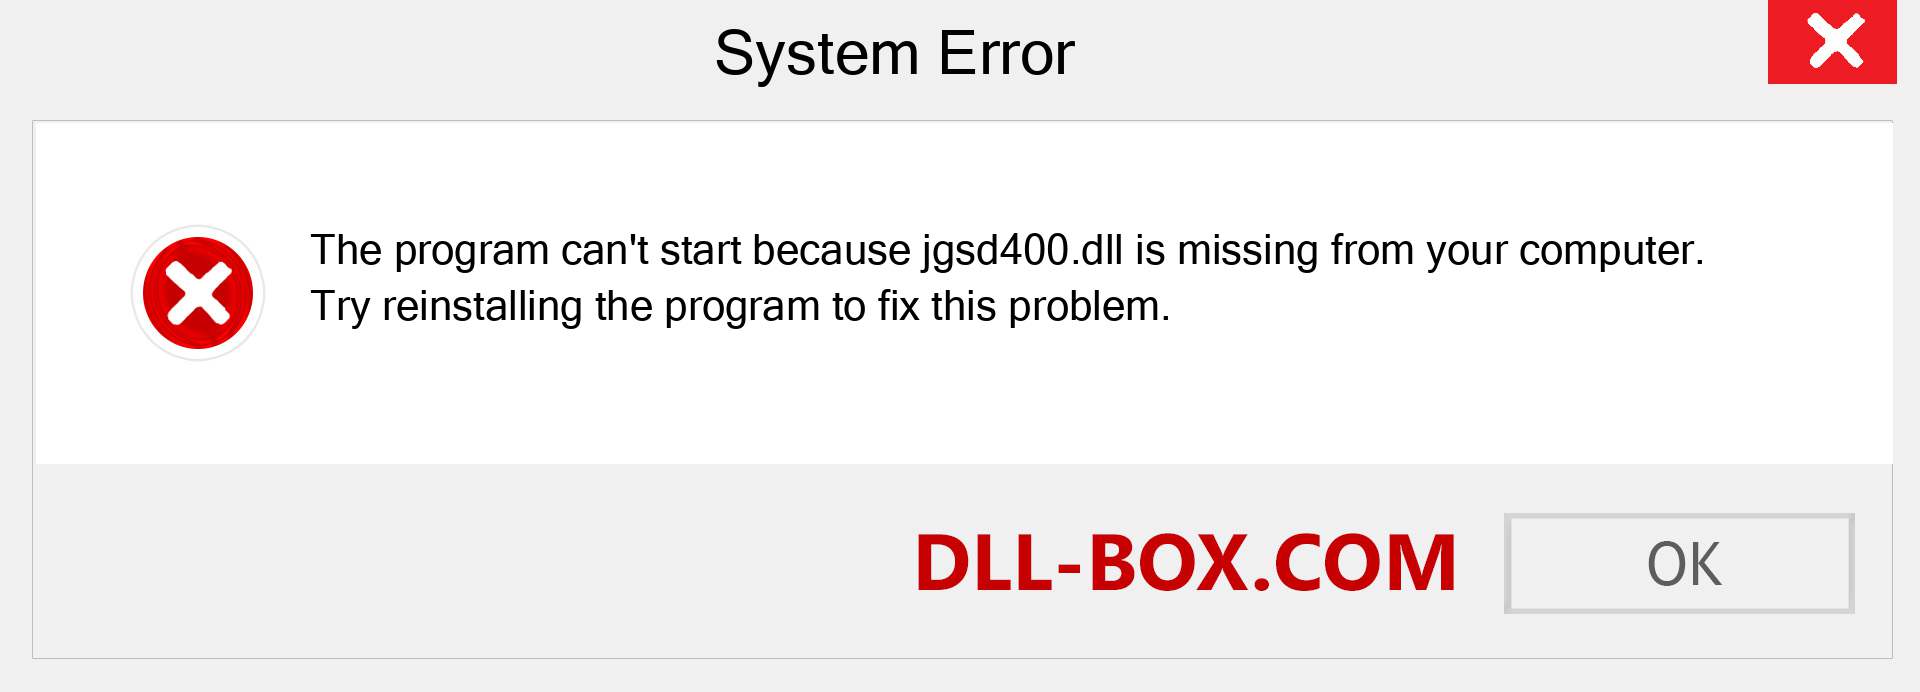  jgsd400.dll file is missing?. Download for Windows 7, 8, 10 - Fix  jgsd400 dll Missing Error on Windows, photos, images